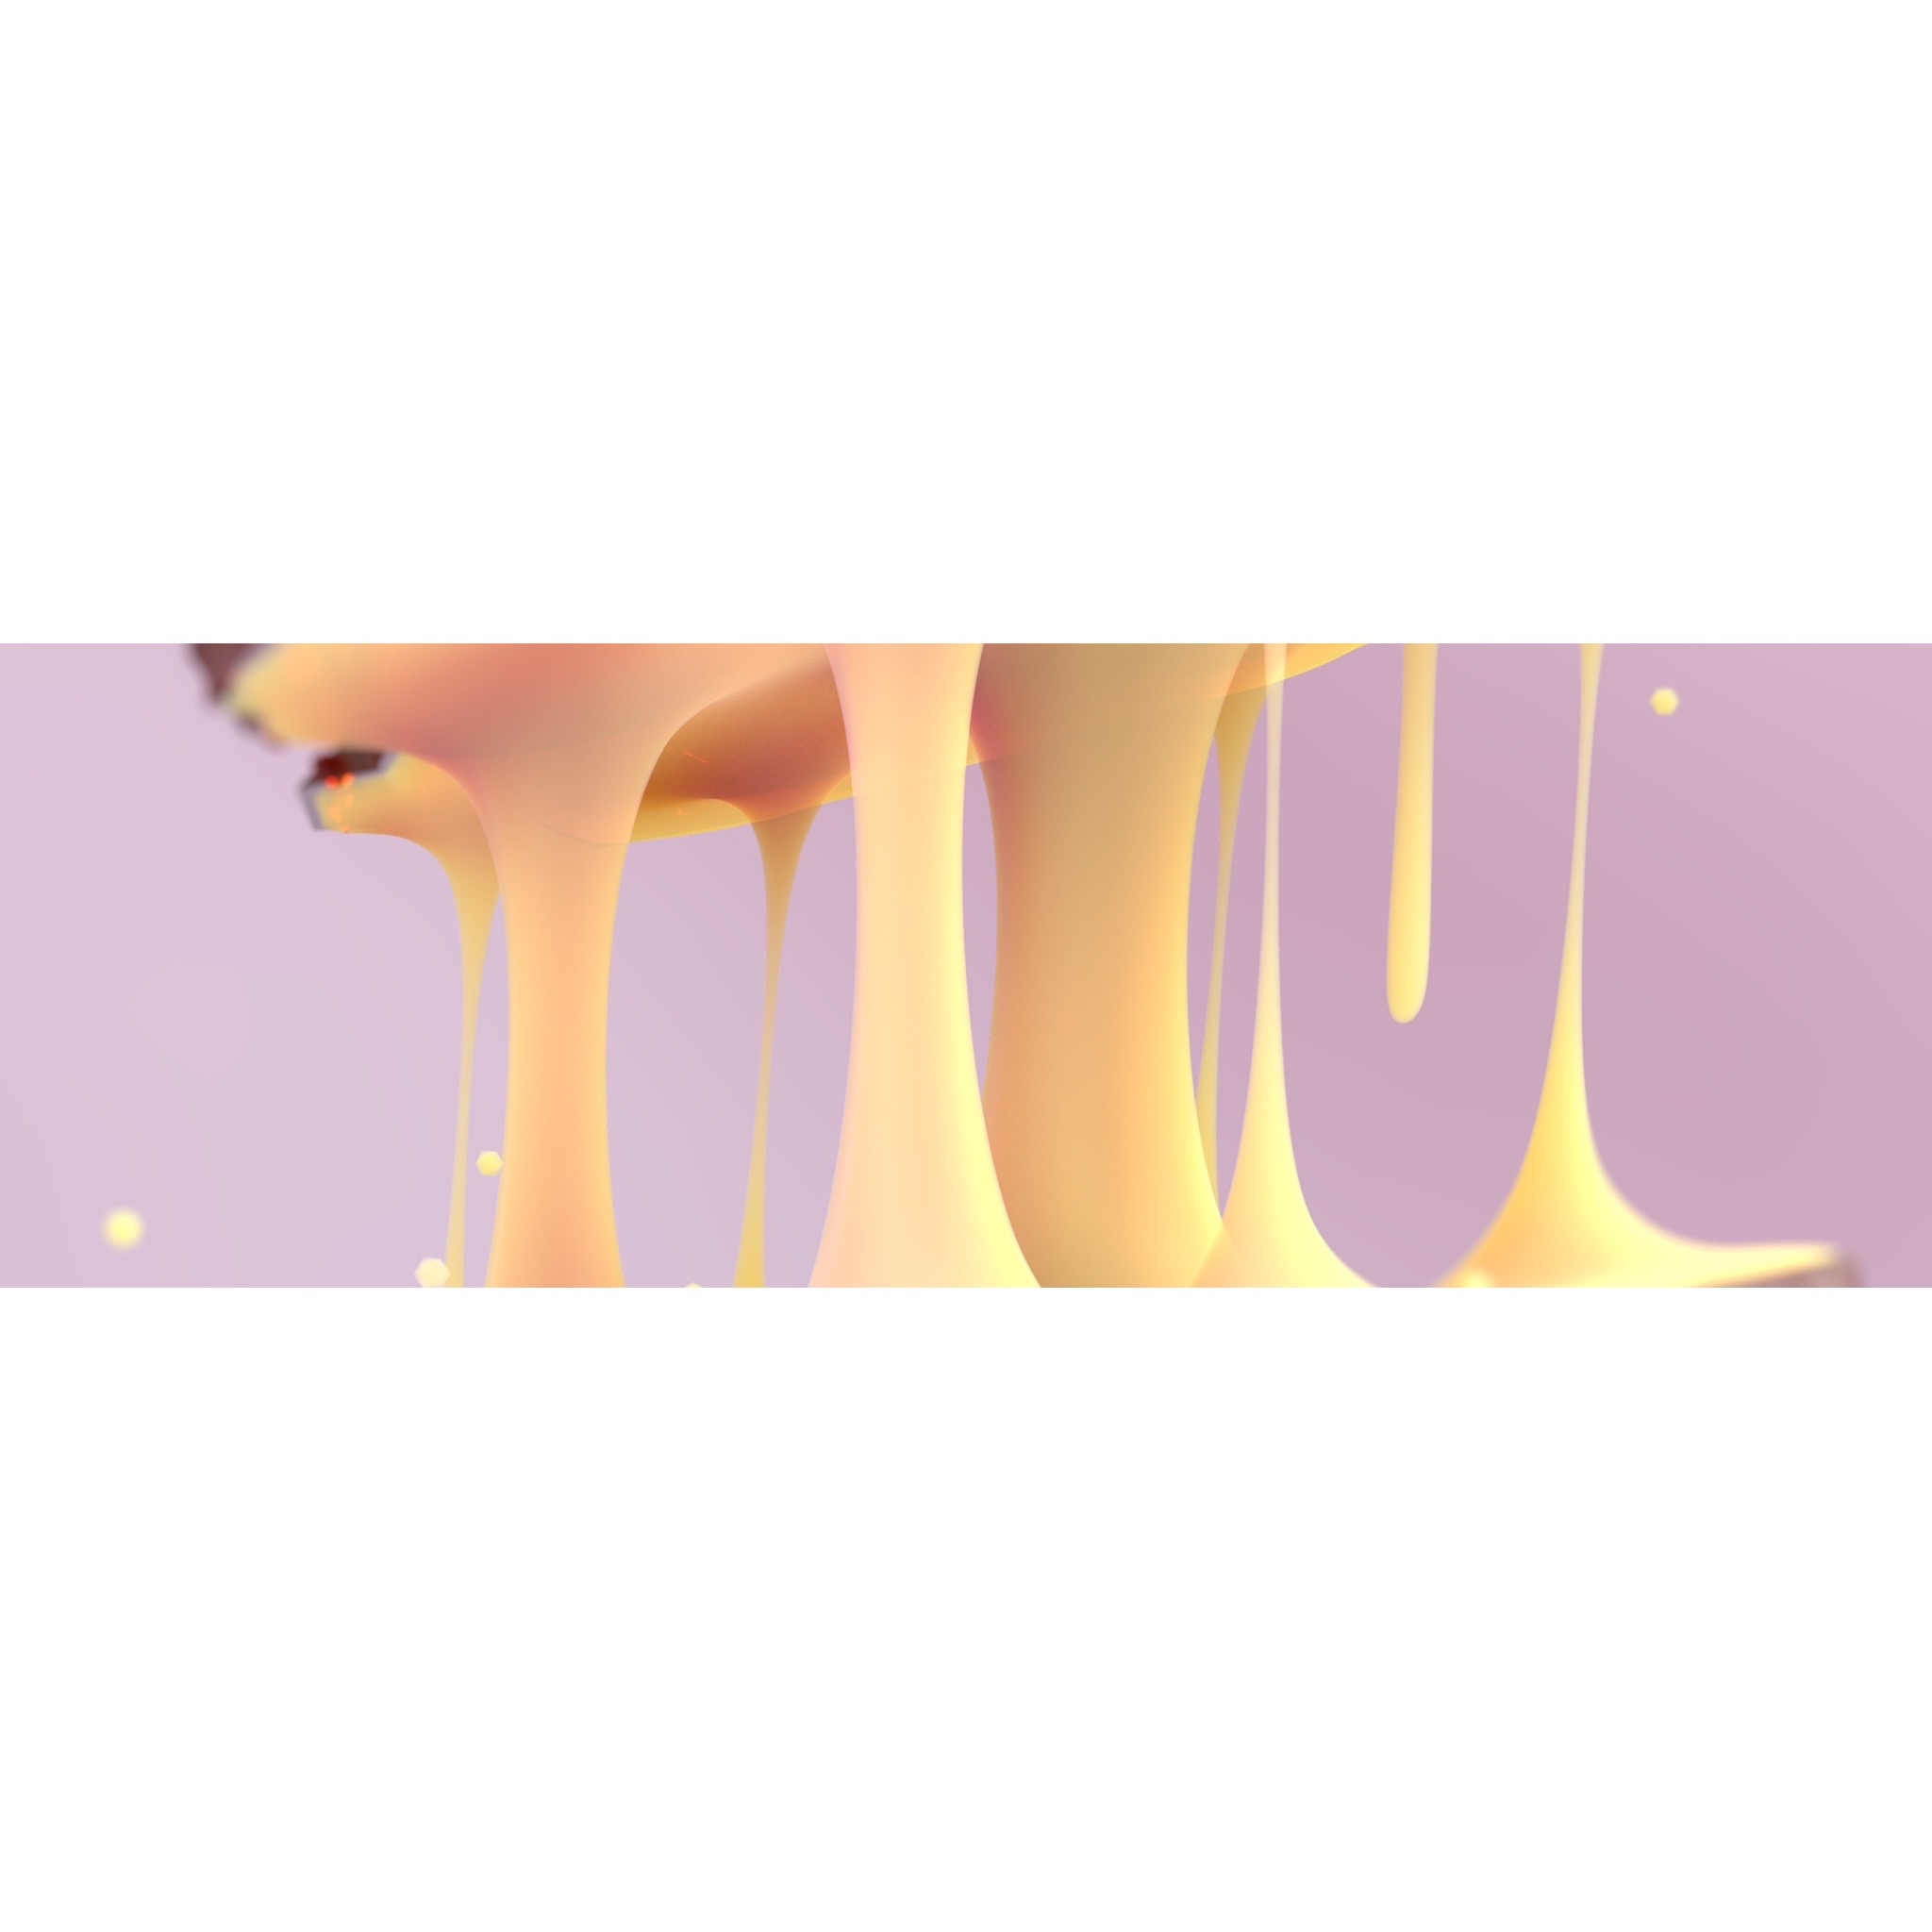 norm banner